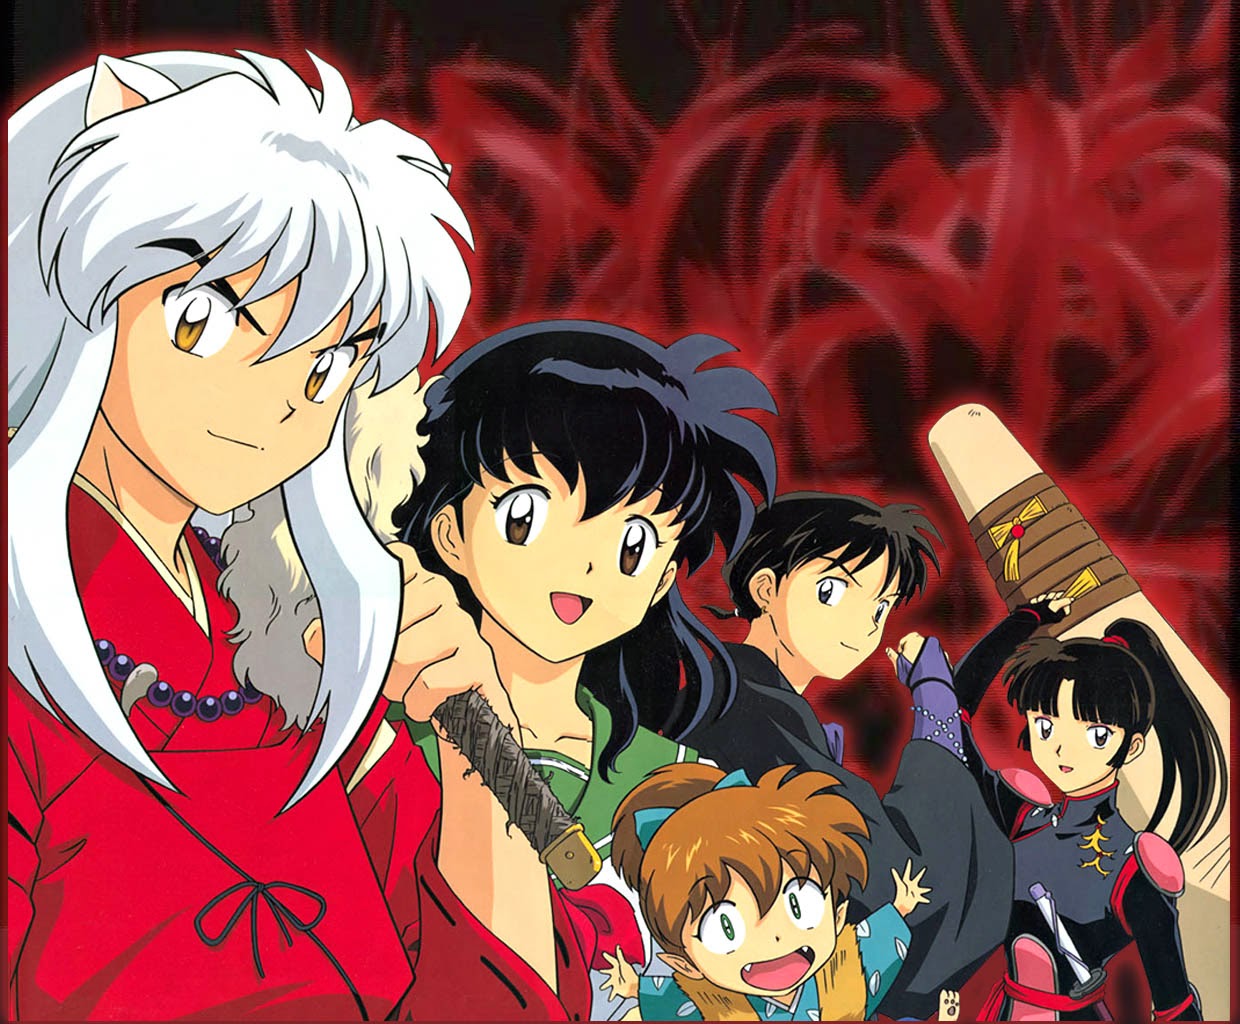 Inuyasha Review - Anime reviews | Japanese anime shows | My Anime Day